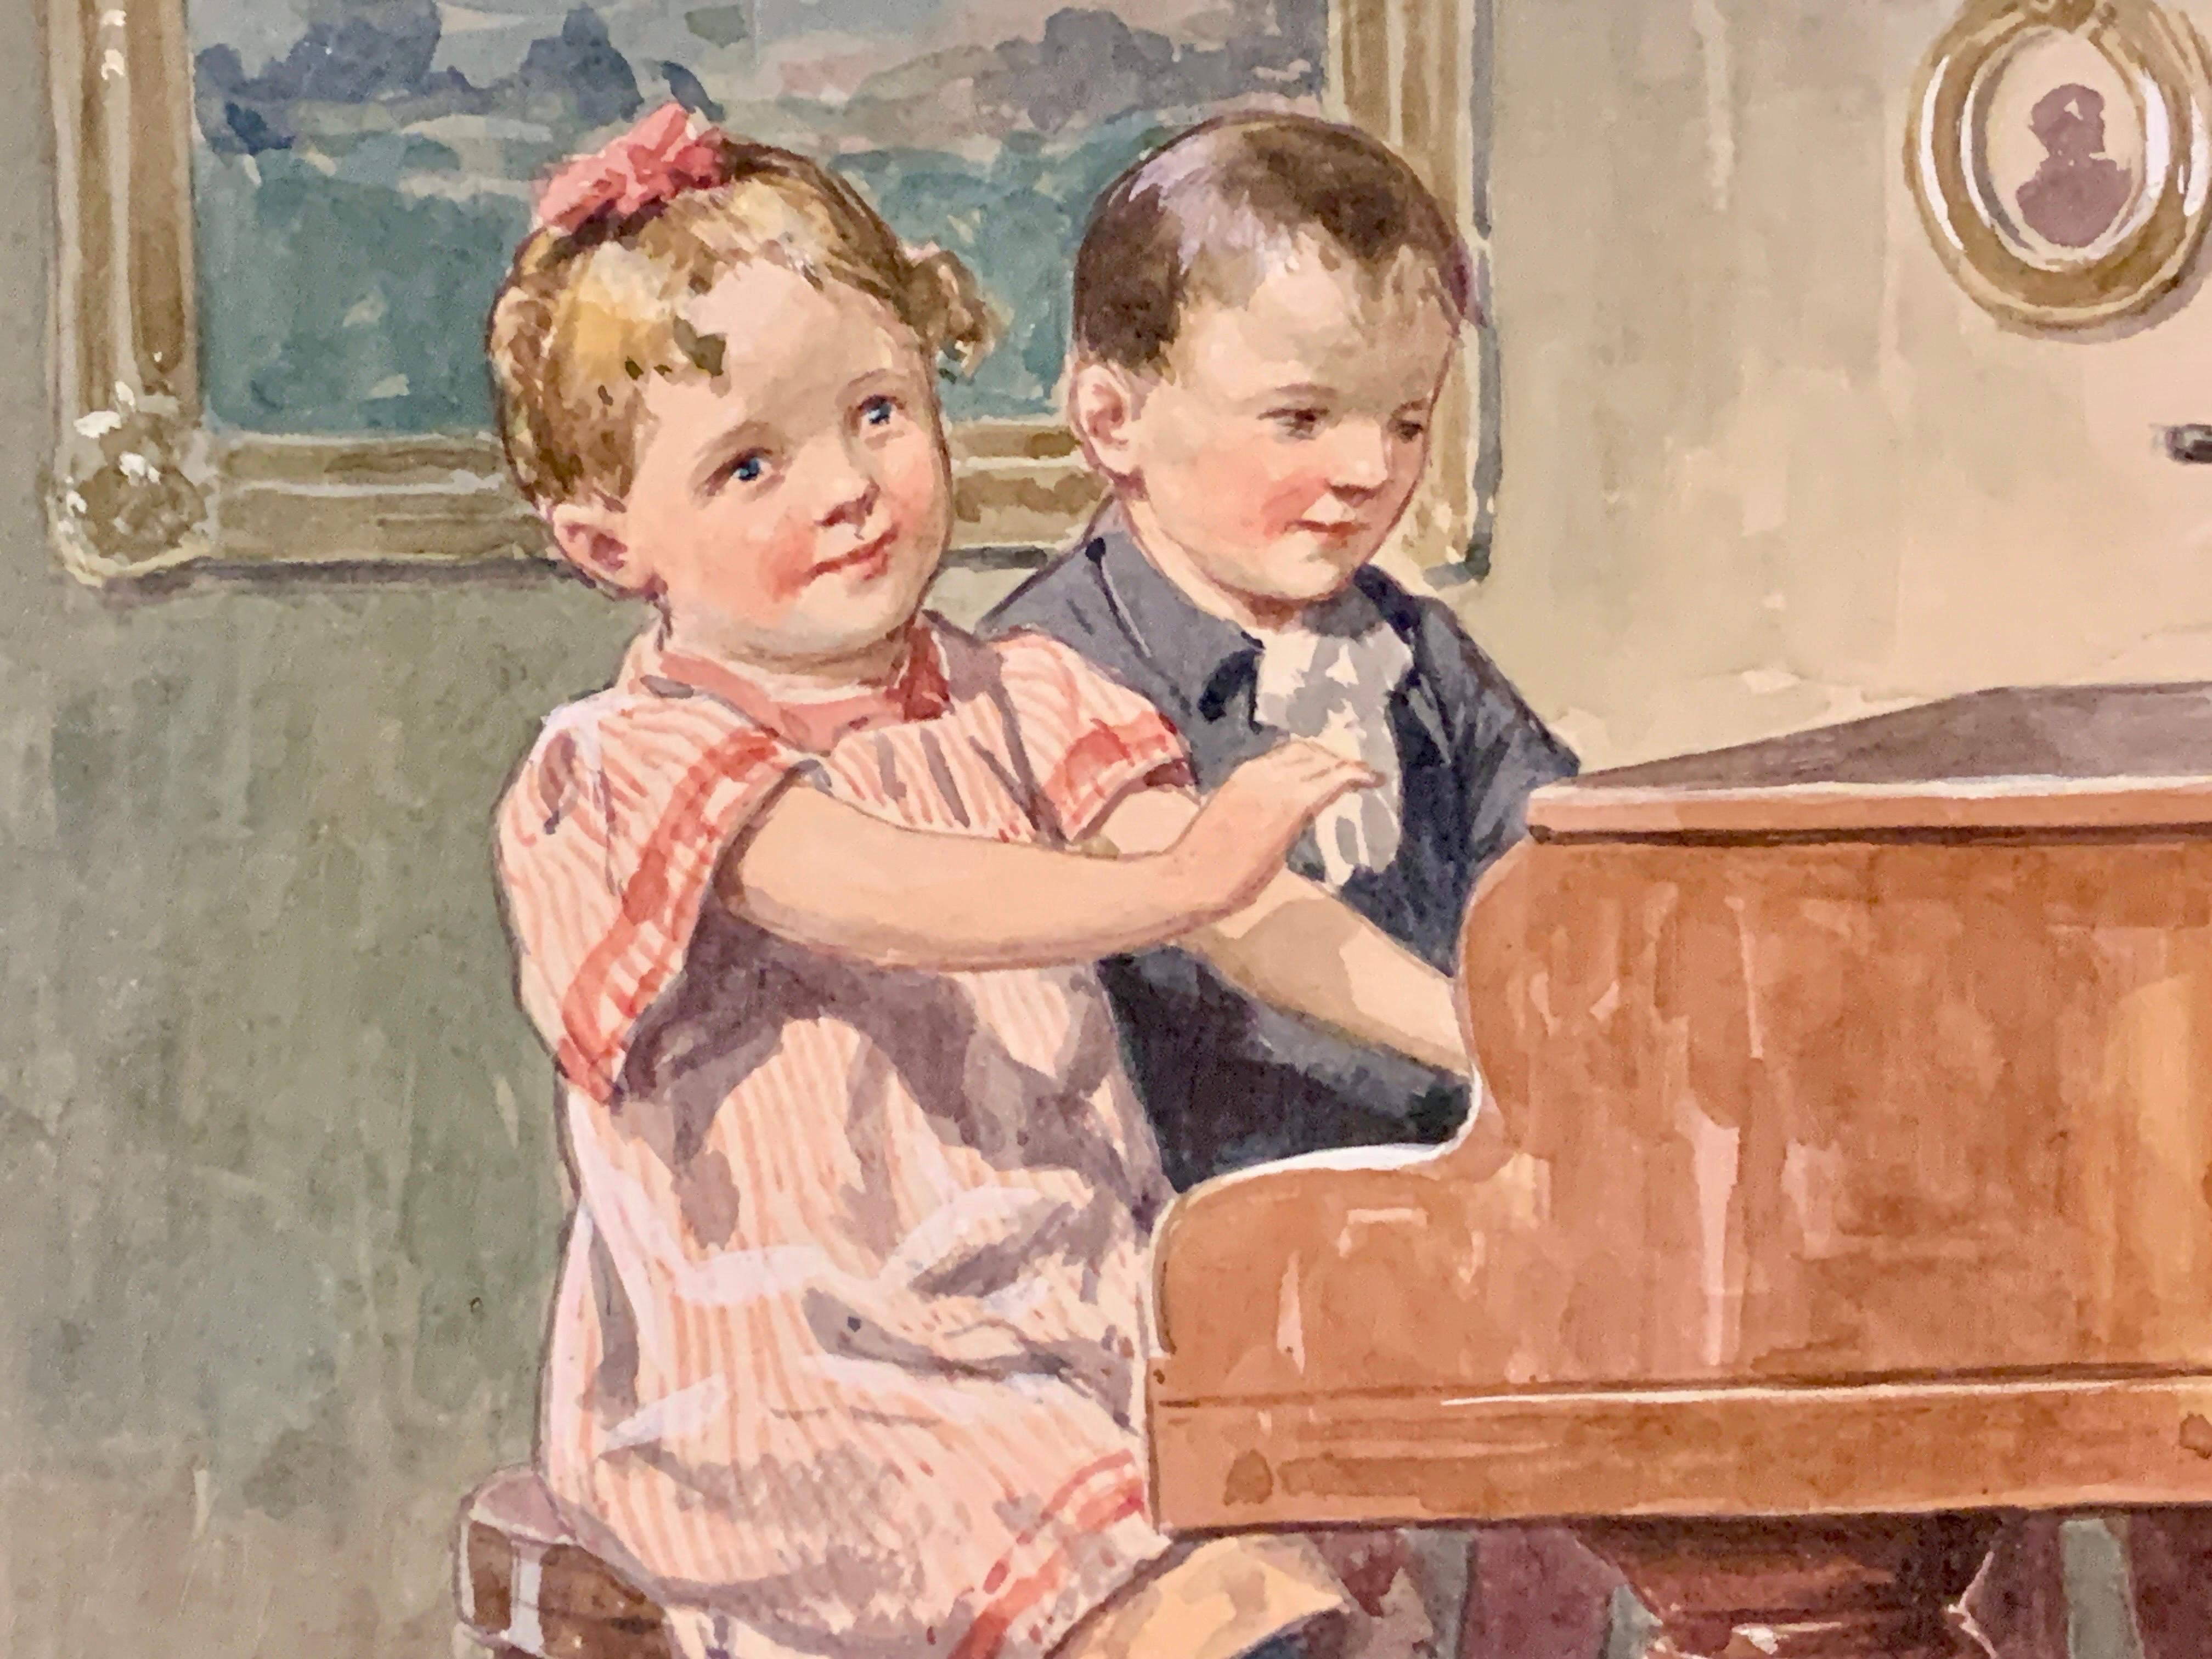 Early 20th century German or Austrian children playing a piano and flute - Brown Figurative Art by Karl Feiertag